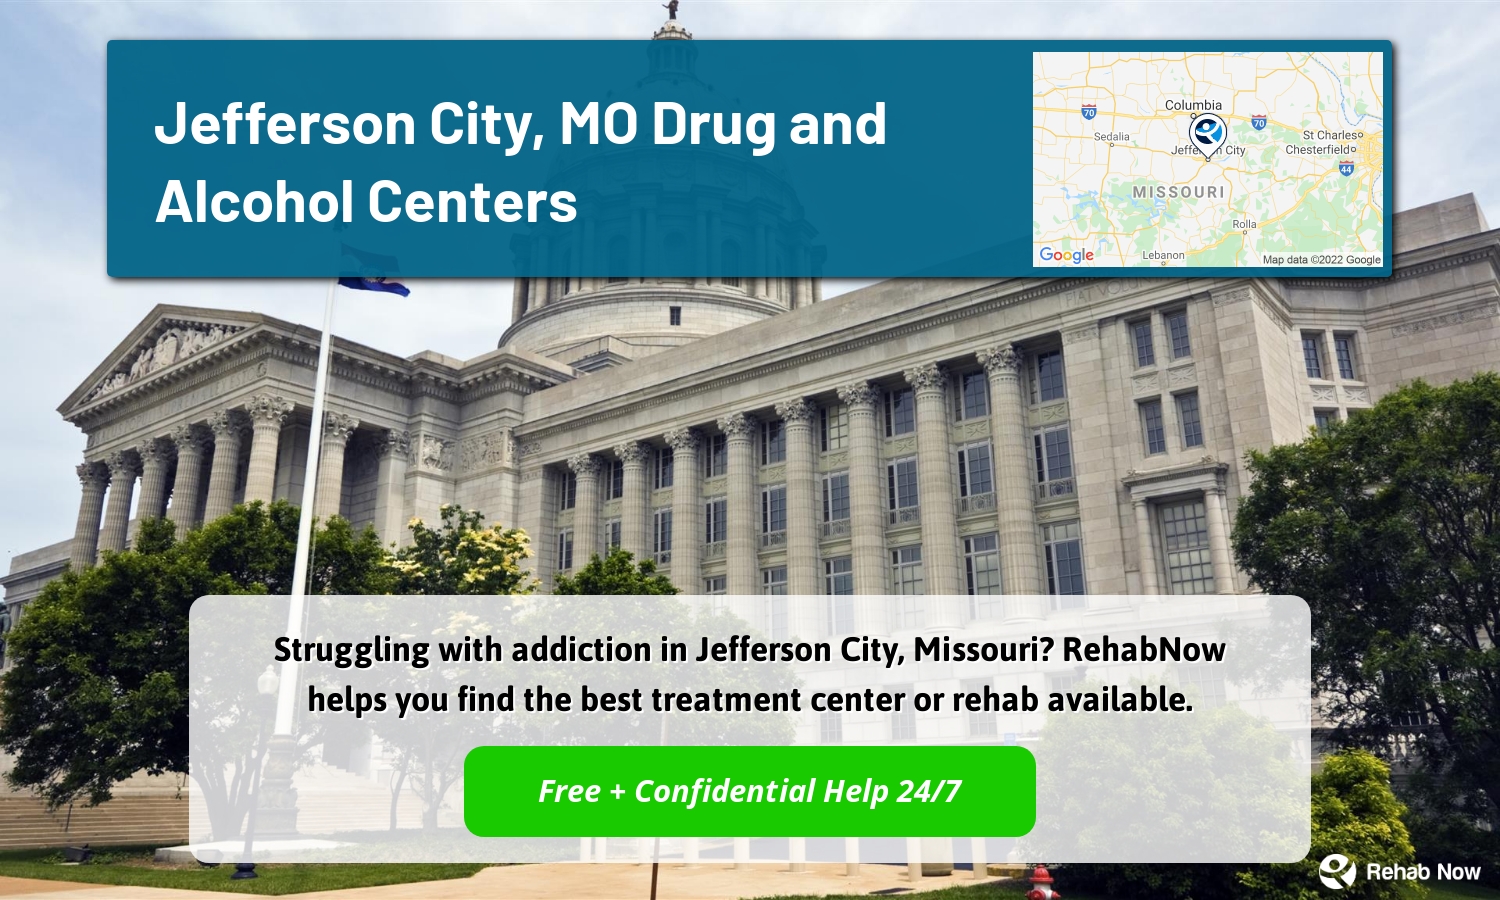 Struggling with addiction in Jefferson City, Missouri? RehabNow helps you find the best treatment center or rehab available.